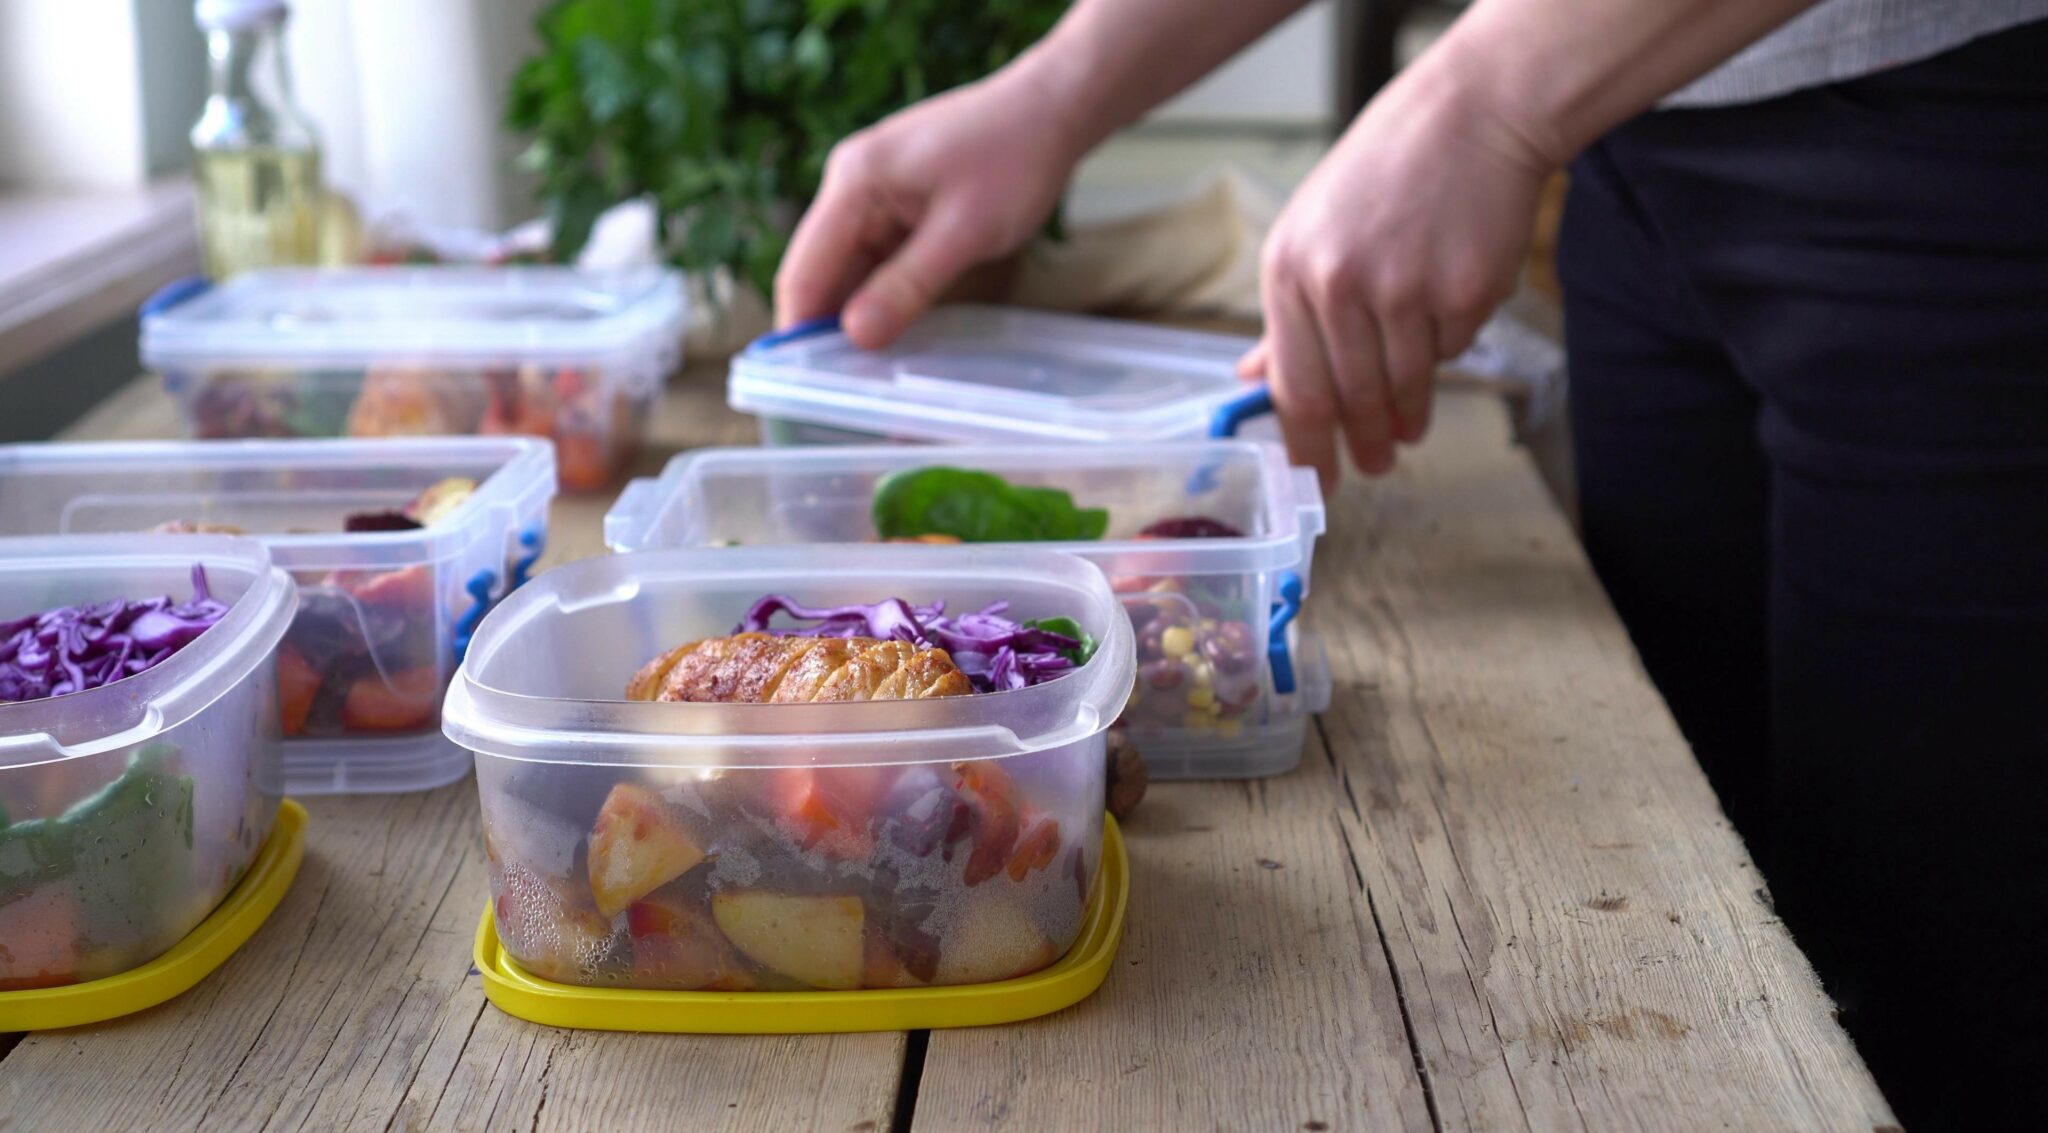 featured image used as a cover for the Meal Prep Blog